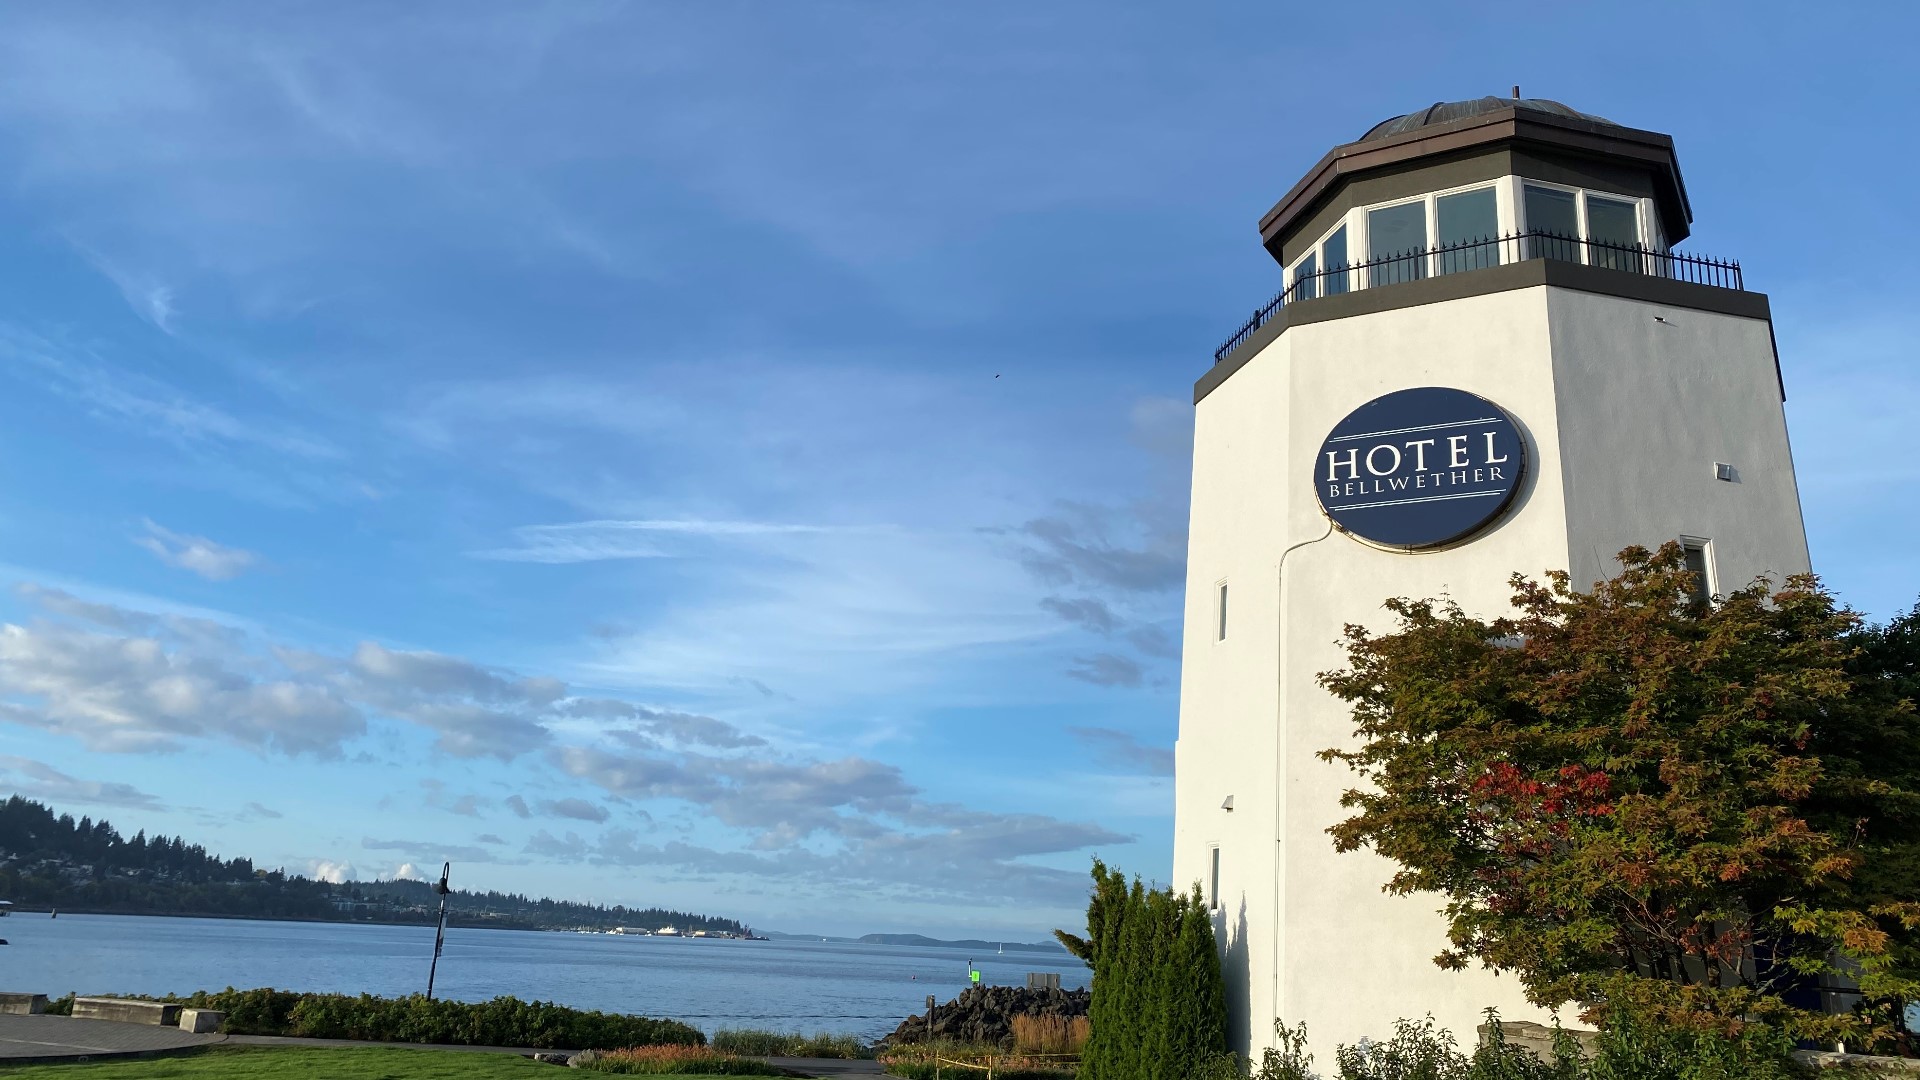 The iconic getaway by Bellingham Bay keeps traditions while continuing to innovate. Sponsored by Hotel Bellwether